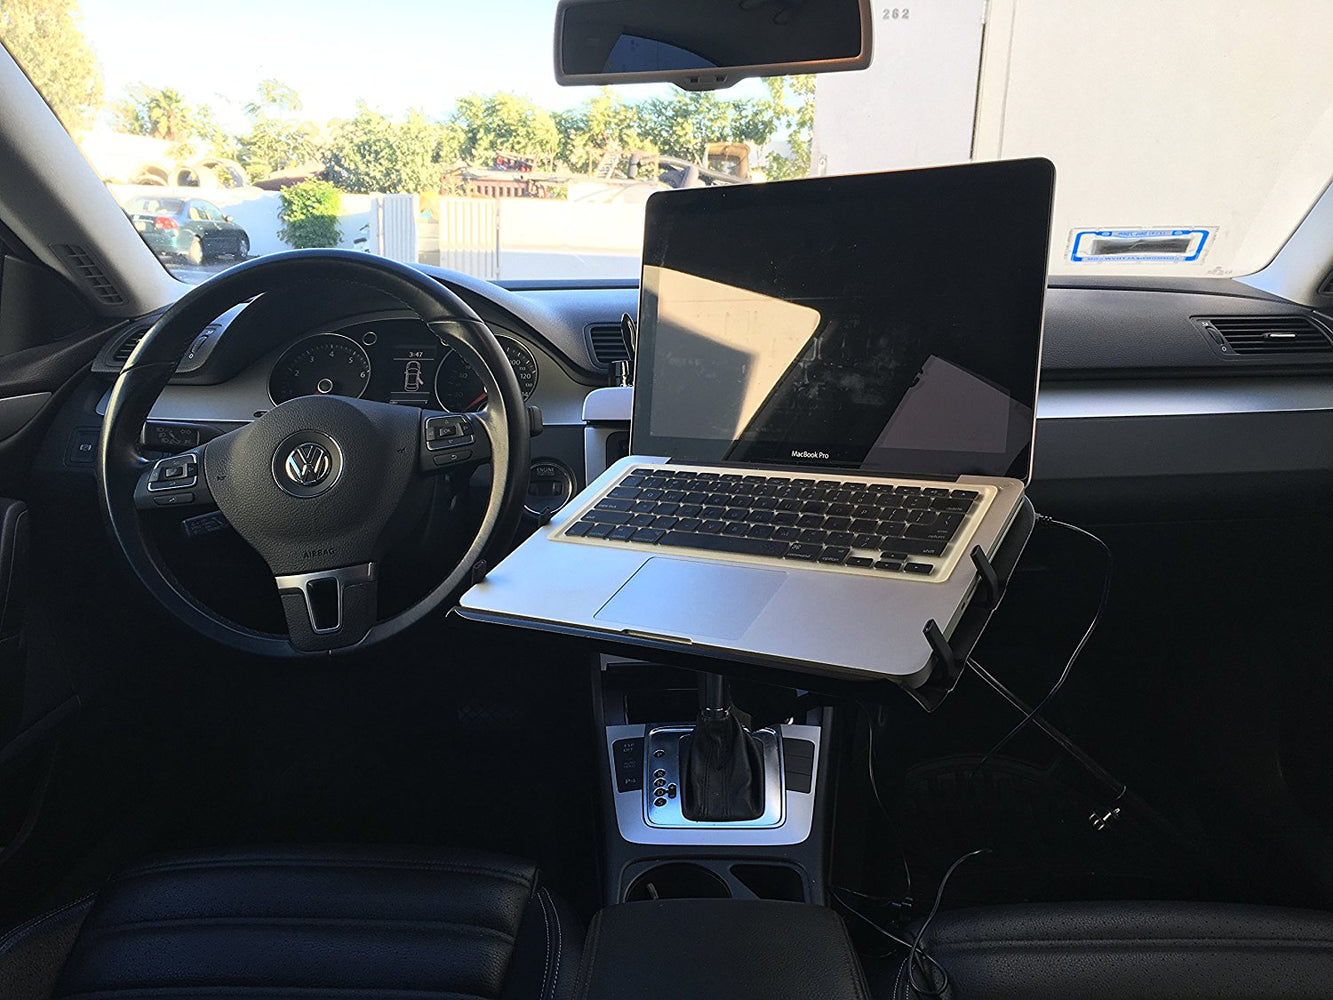 AA Products Computer Laptop Mount Stand w/Cooling Pad Tray for Cars-Trucks-Vehicles (K002-AC) - AA Products Inc